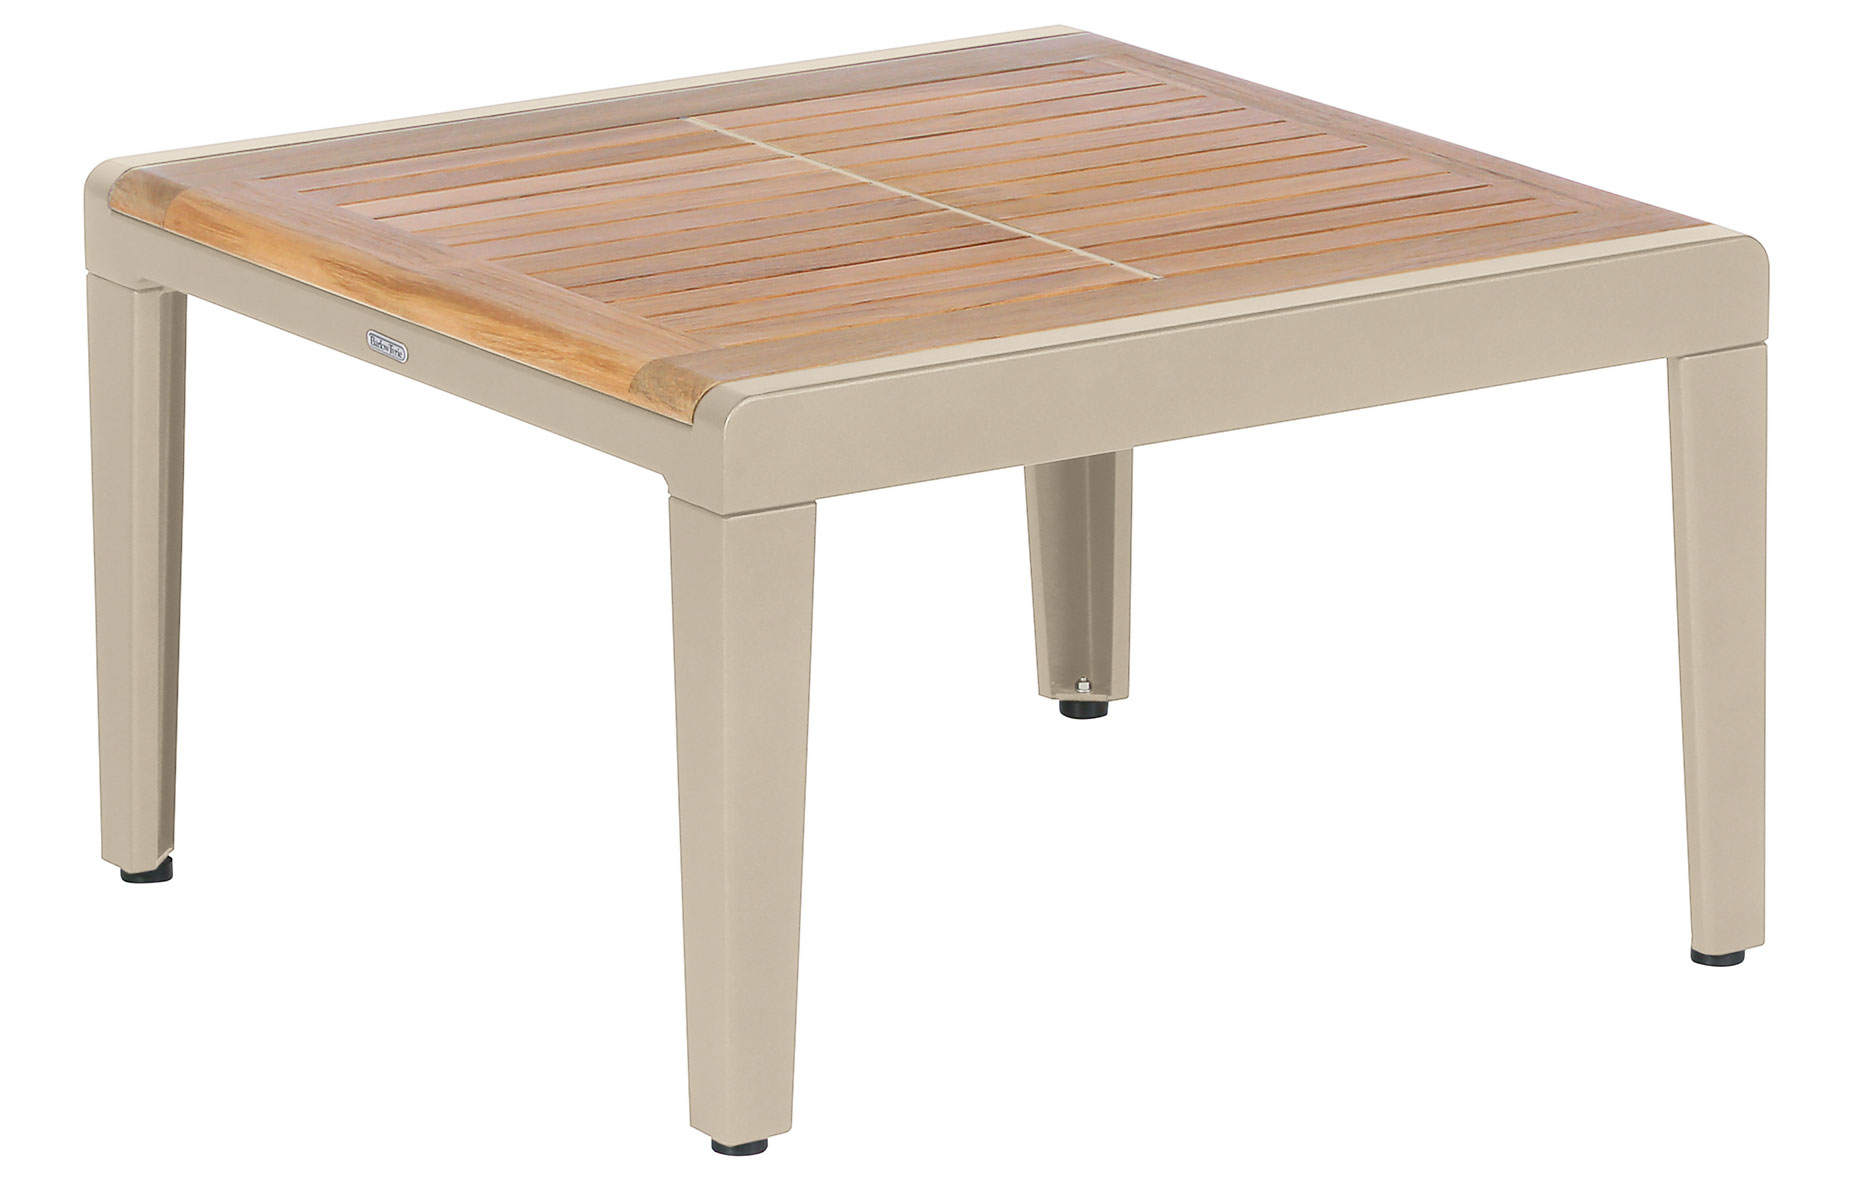 Barlow Tyrie Aura Teak and Aluminum Low Side Table 60